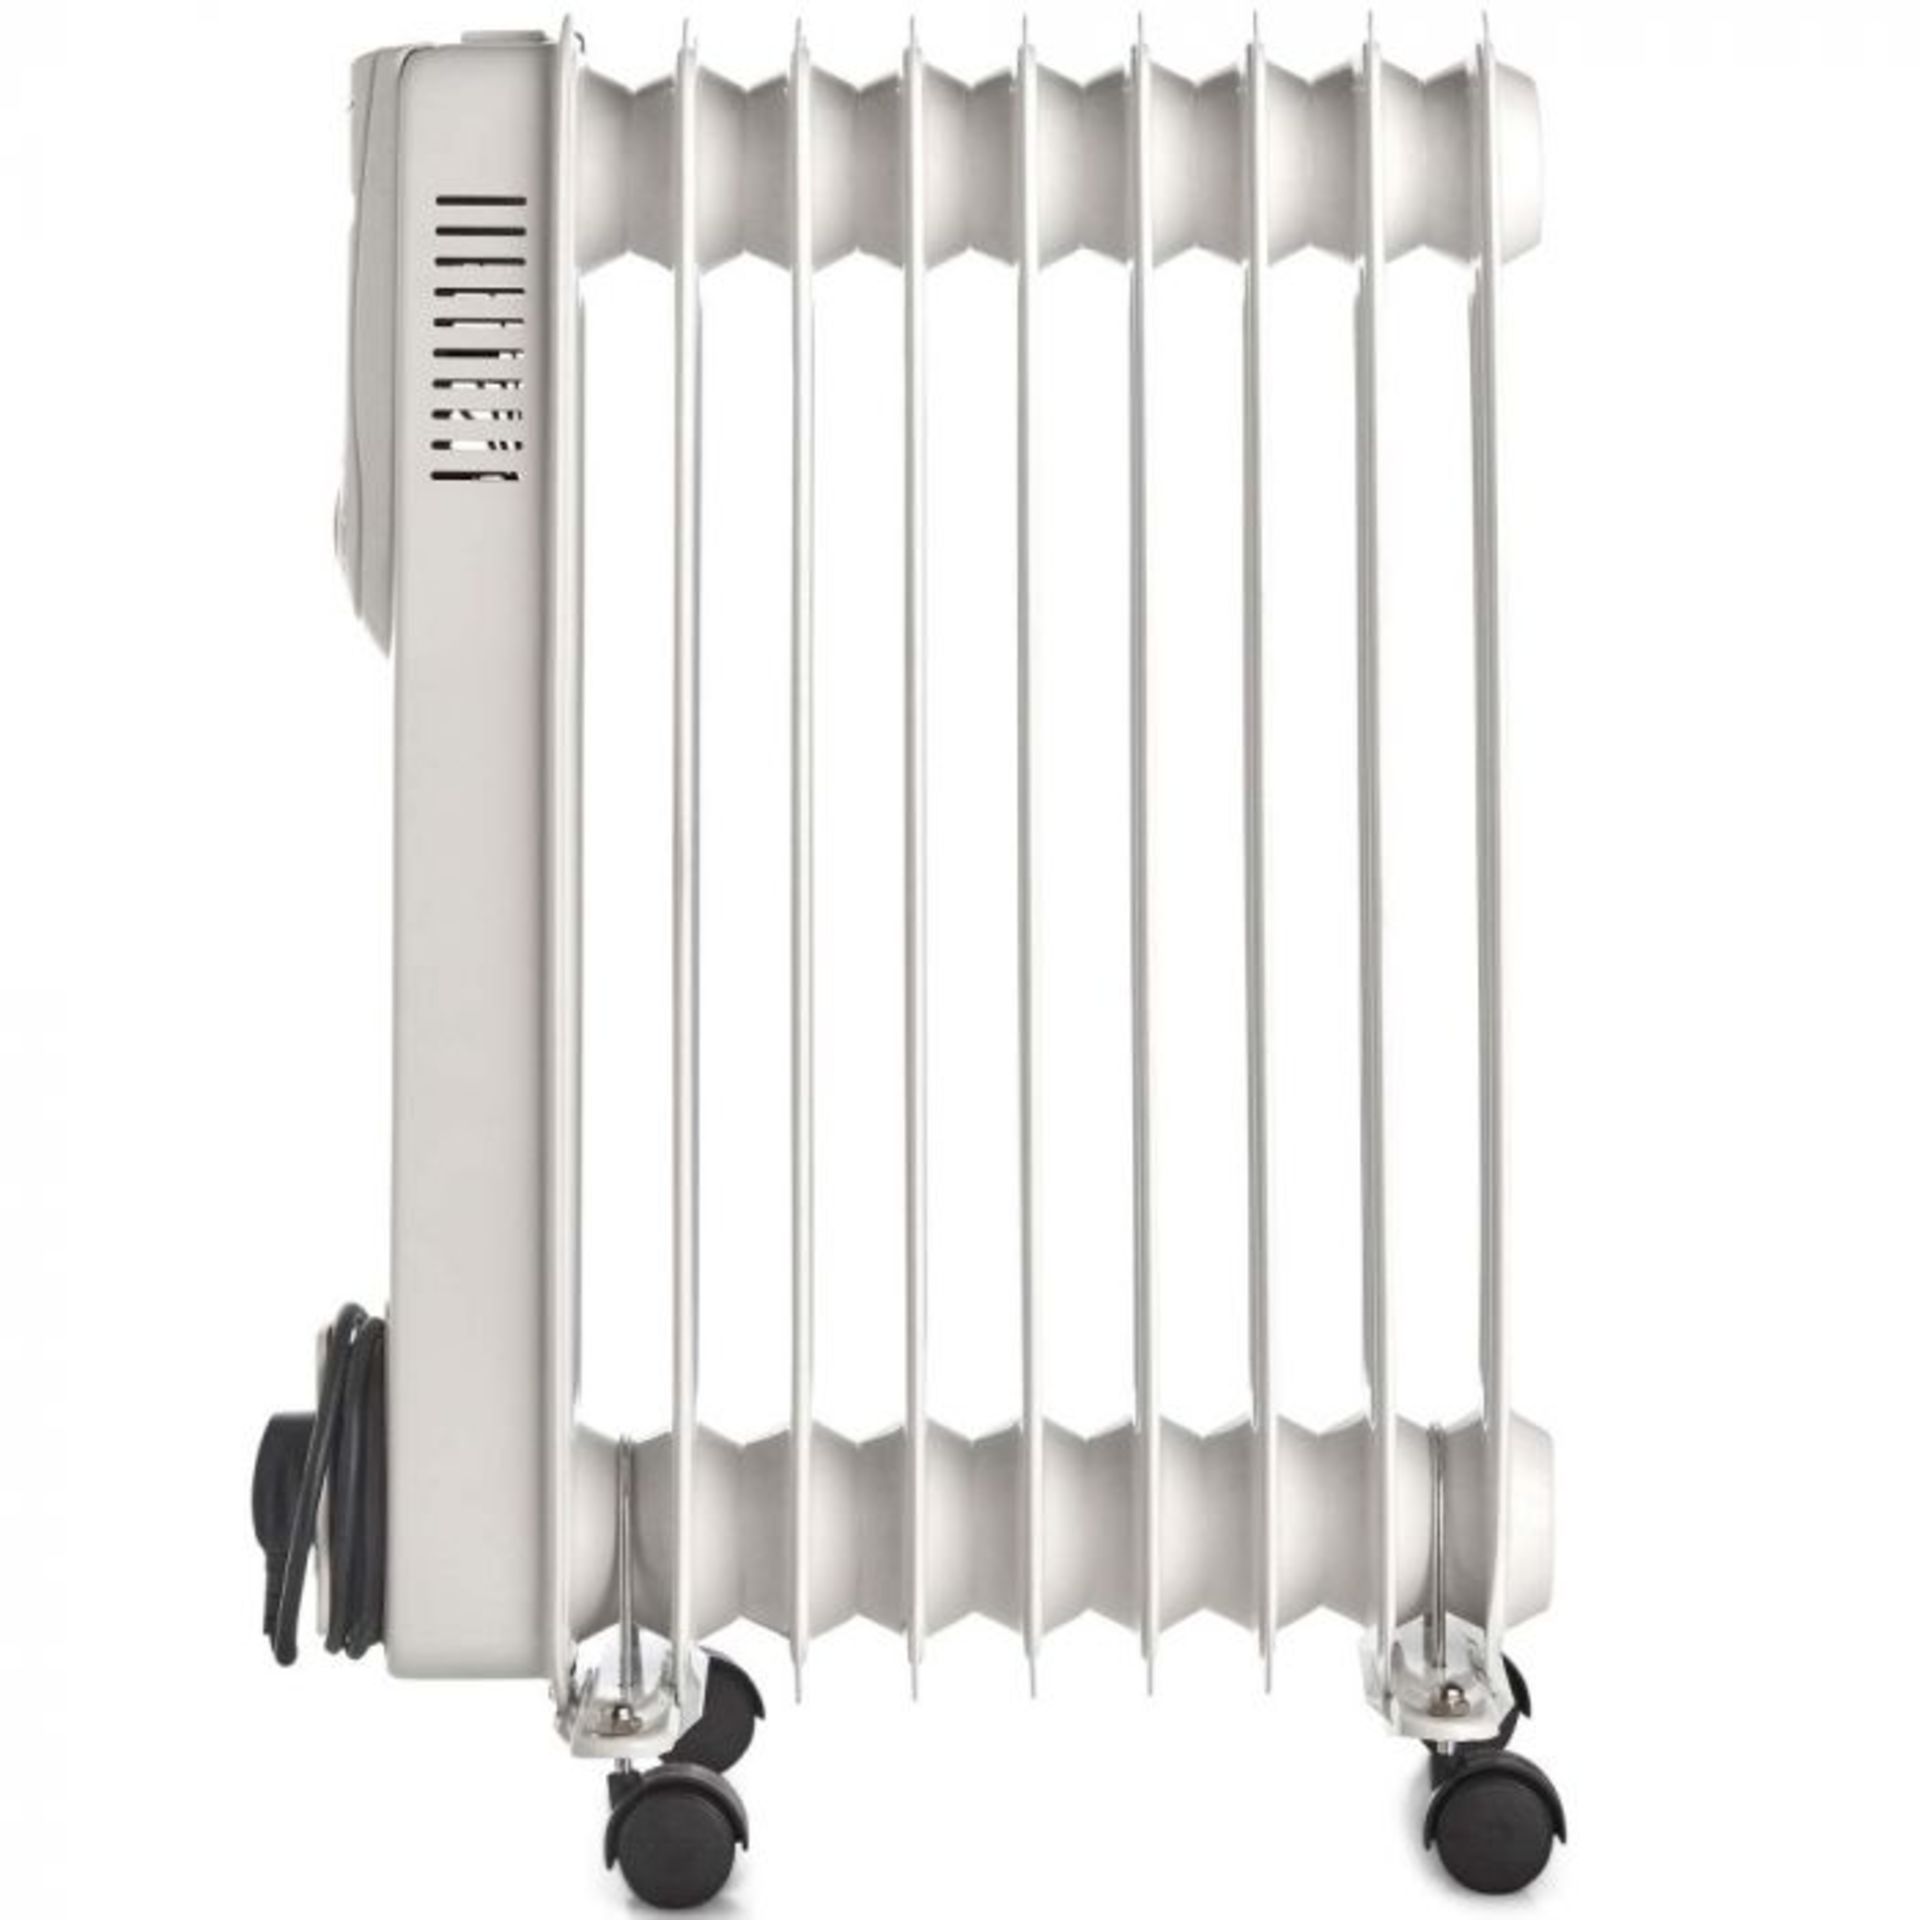 (S45) 9 Fin 2000W Oil Filled Radiator - White Powerful 2000W radiator with 9 oil-filled fins ?... - Image 3 of 3